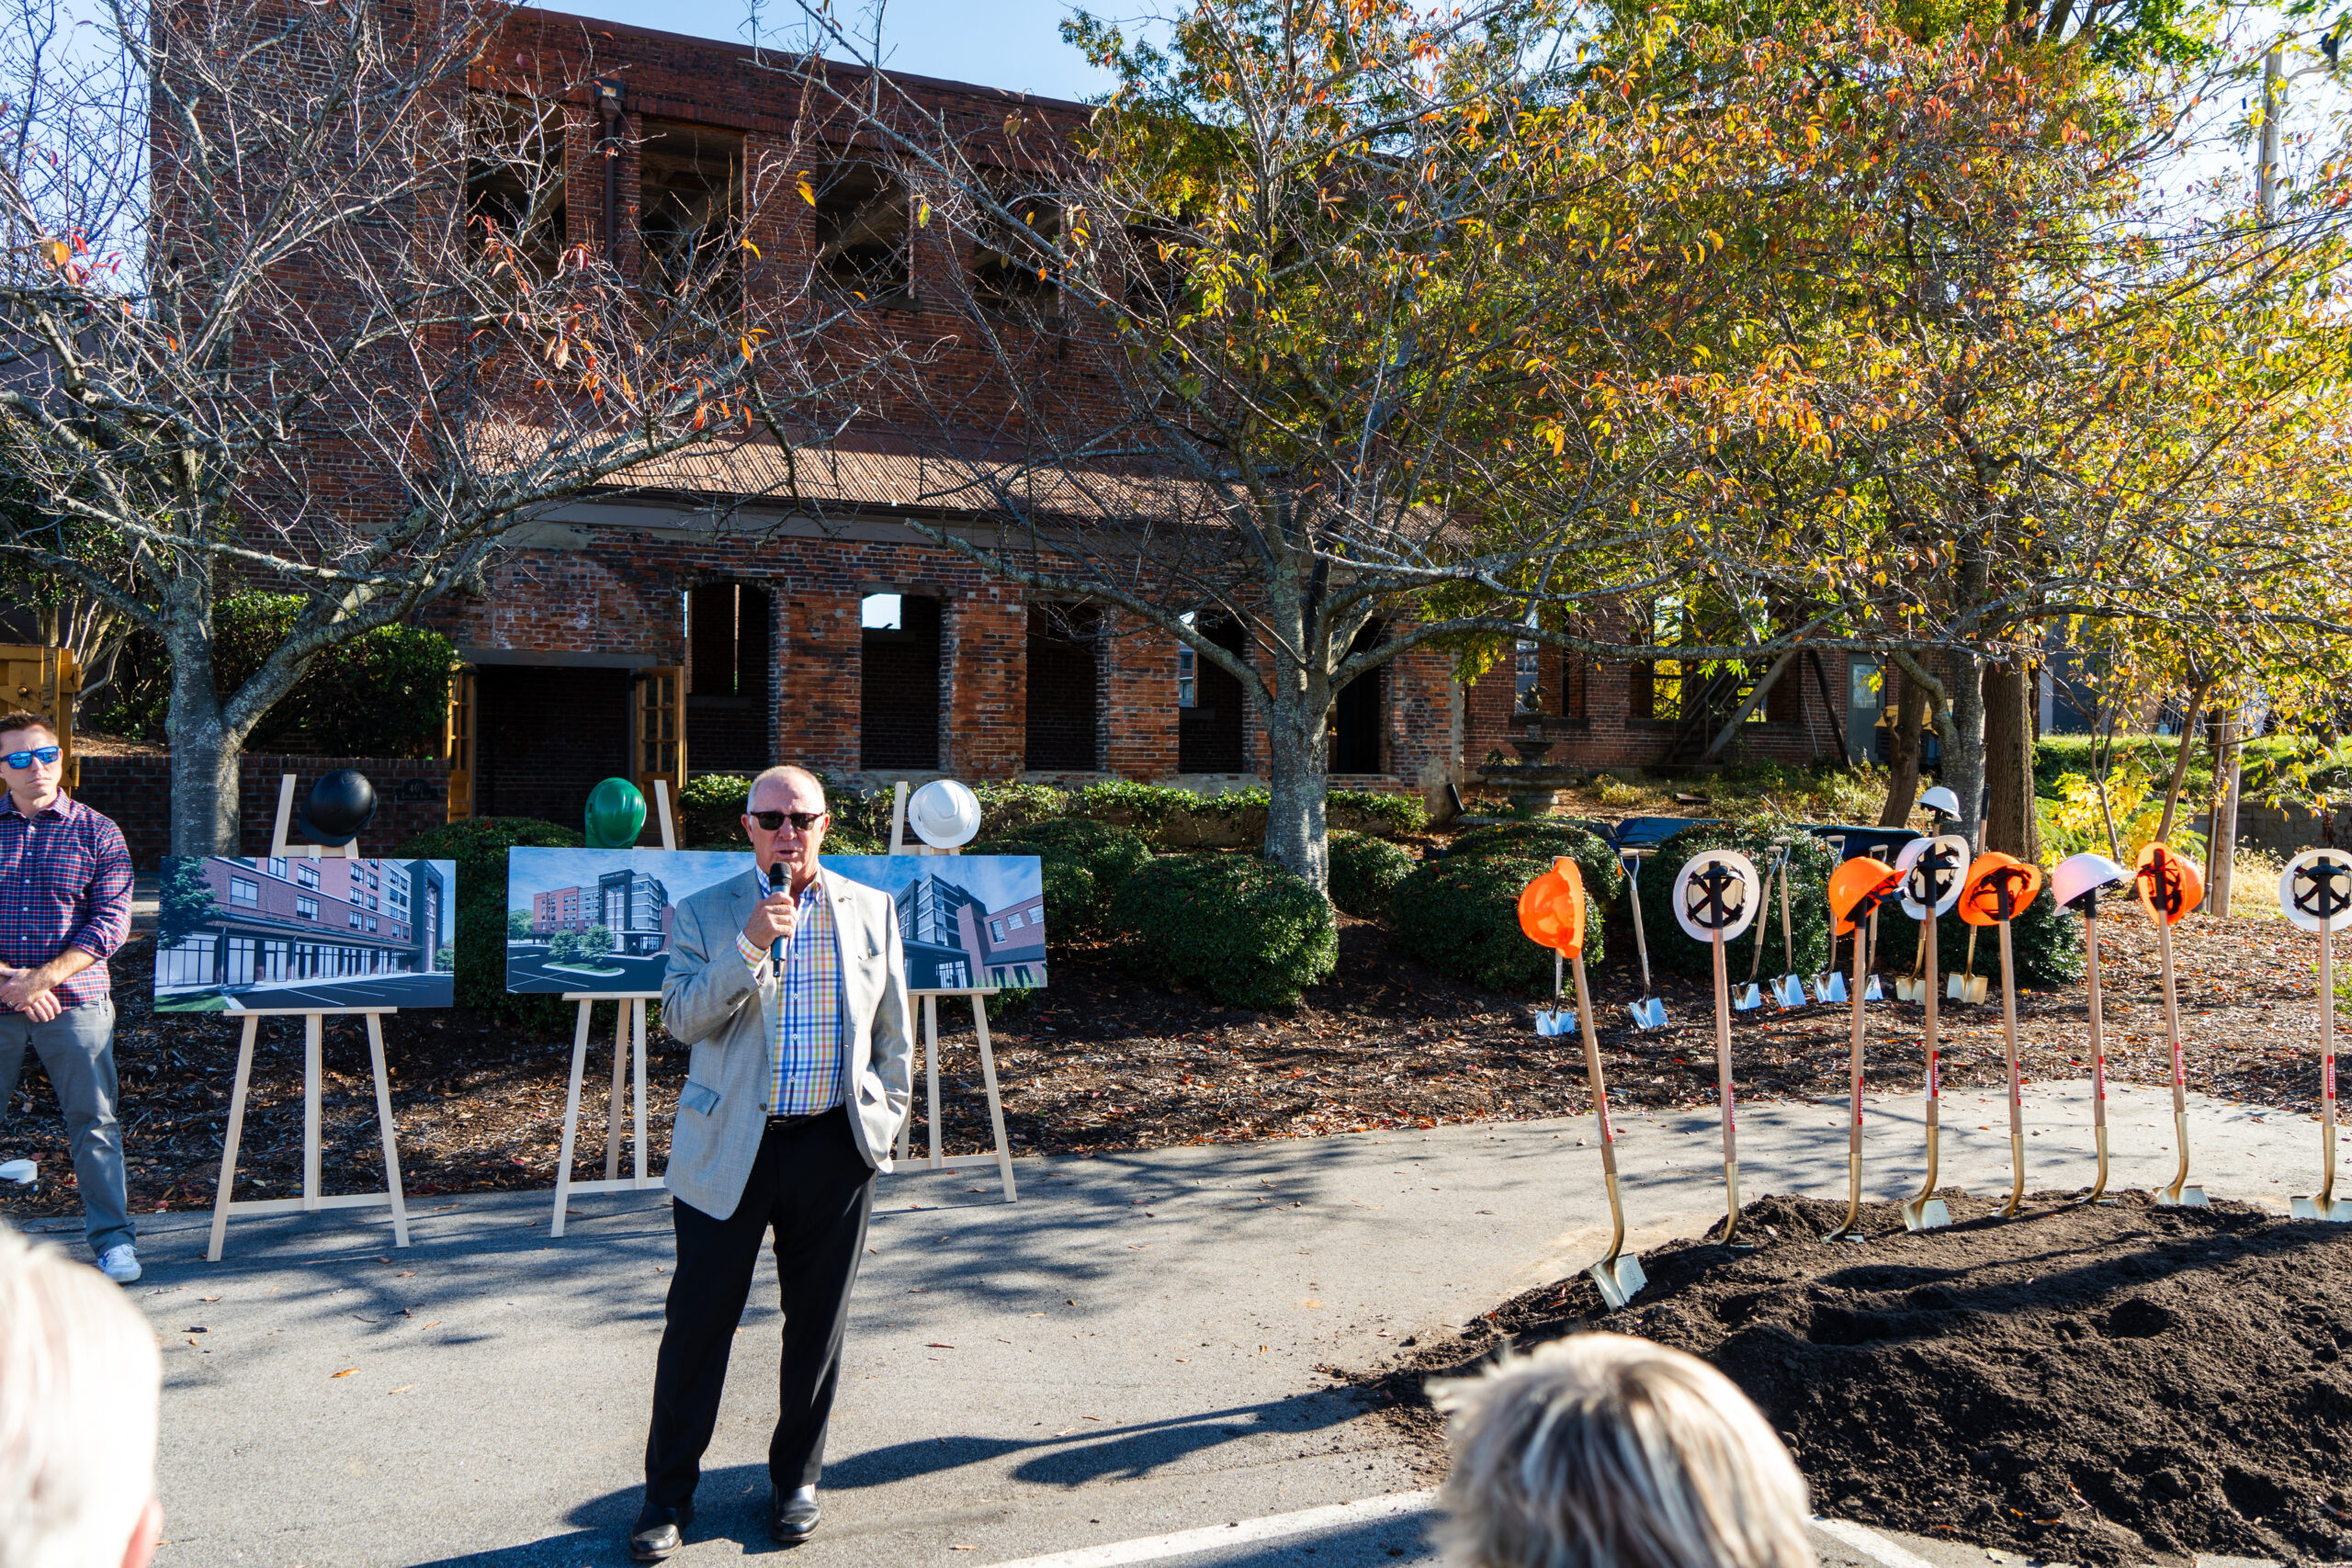 David Congdon, President of the Earl & Kathryn Congdon Family Foundation, speaks at the Springhill Suites High Point groundbreaking.